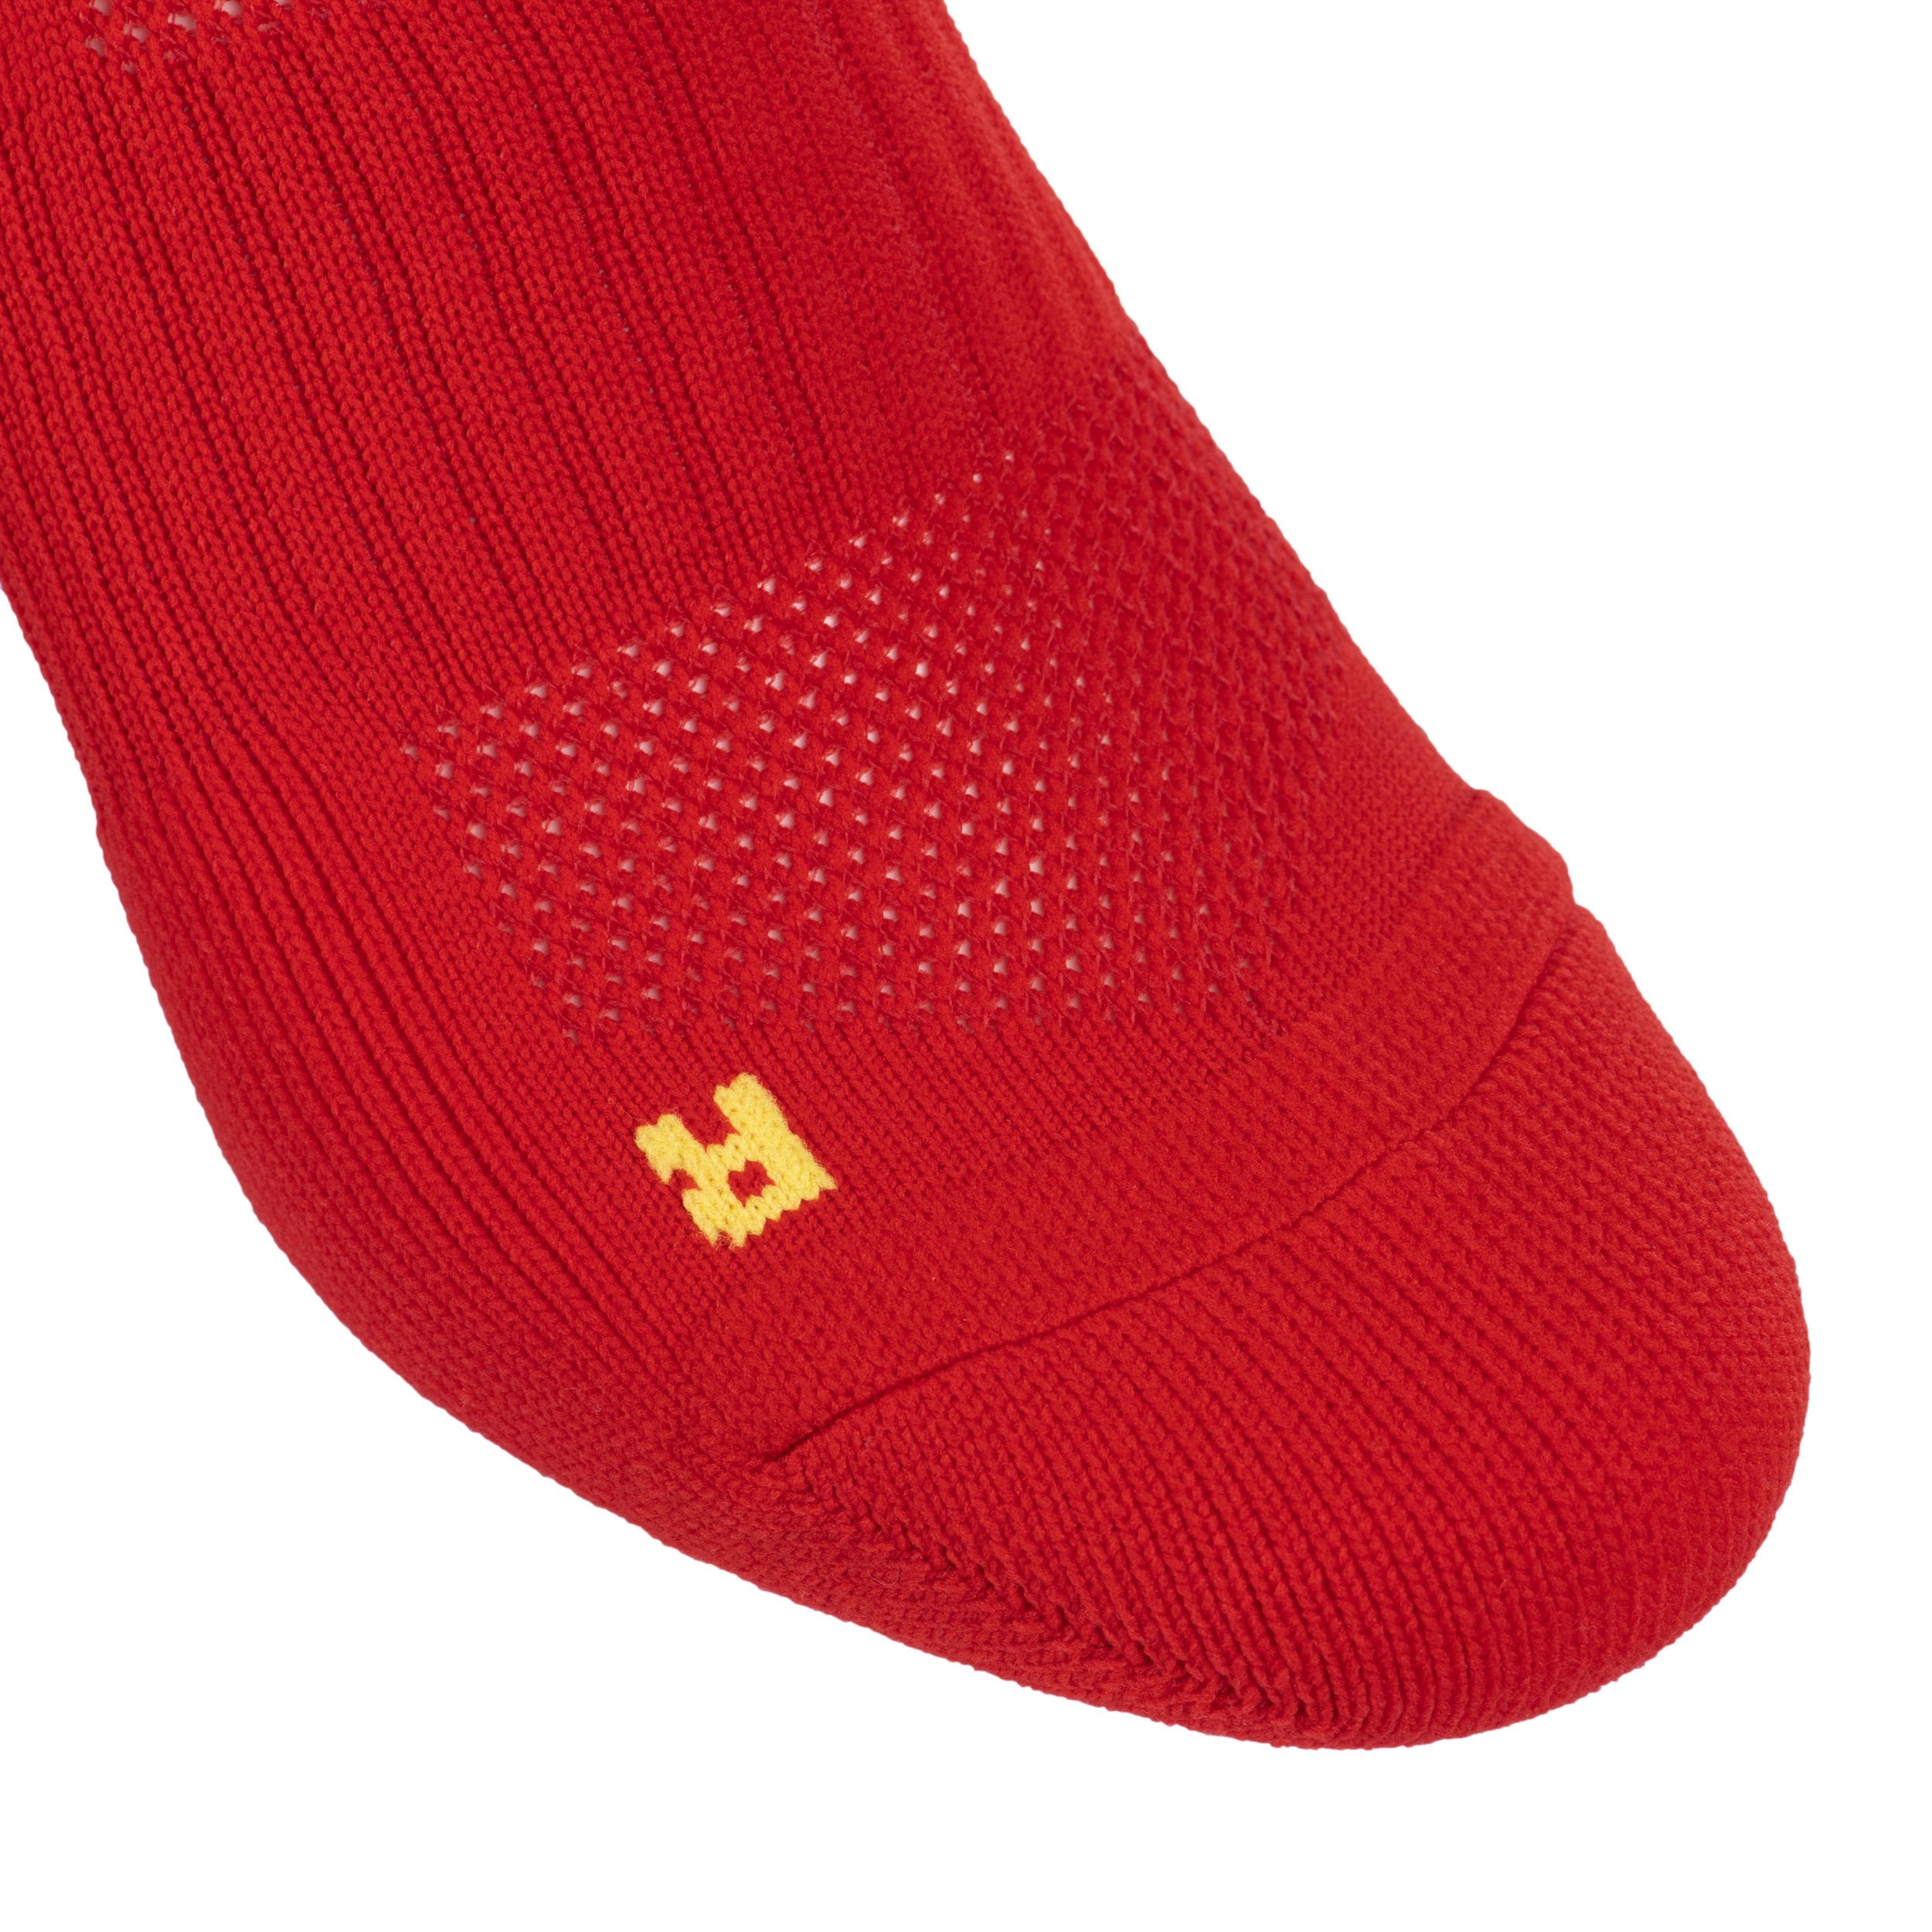 Kids' High Rugby Socks R500 - Red/Yellow 4/5